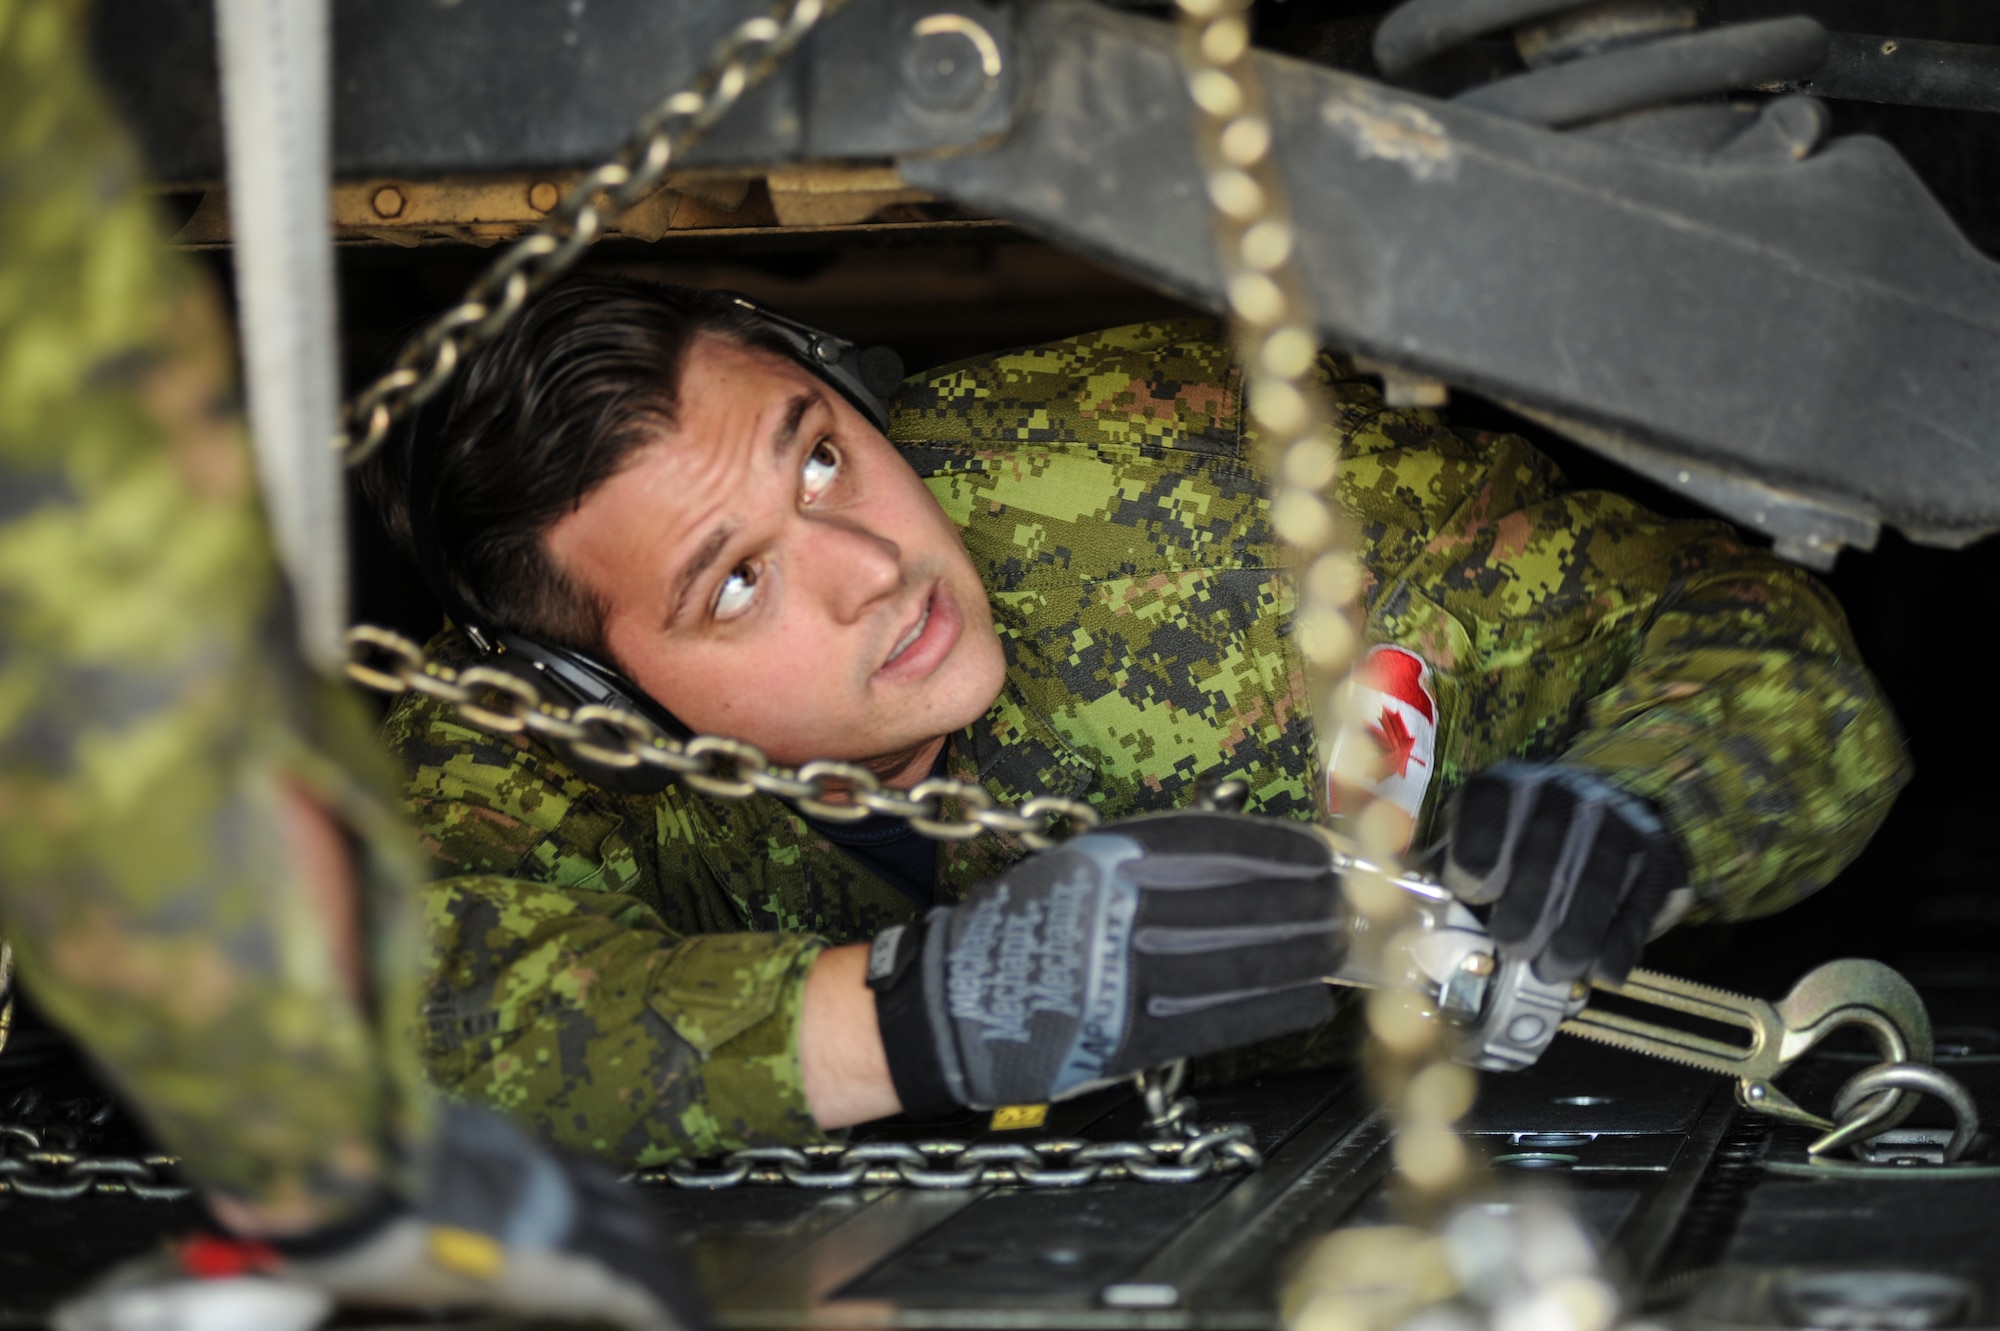 A Royal Canadian Air Force C-130J loadmaster straps a U.S. Army Humvee to the back of a U.S. Air Force C-130J, Feb. 17, 2016, near Fort Polk, La. The RCAF aircrew spent two week at Little Rock Air Force Base, Ark. to practice and improve on combat airlift operations with U.S. coalition forces during GREEN FLAG 16-04. (U.S. Air Force photo/Senior Airman Harry Brexel)